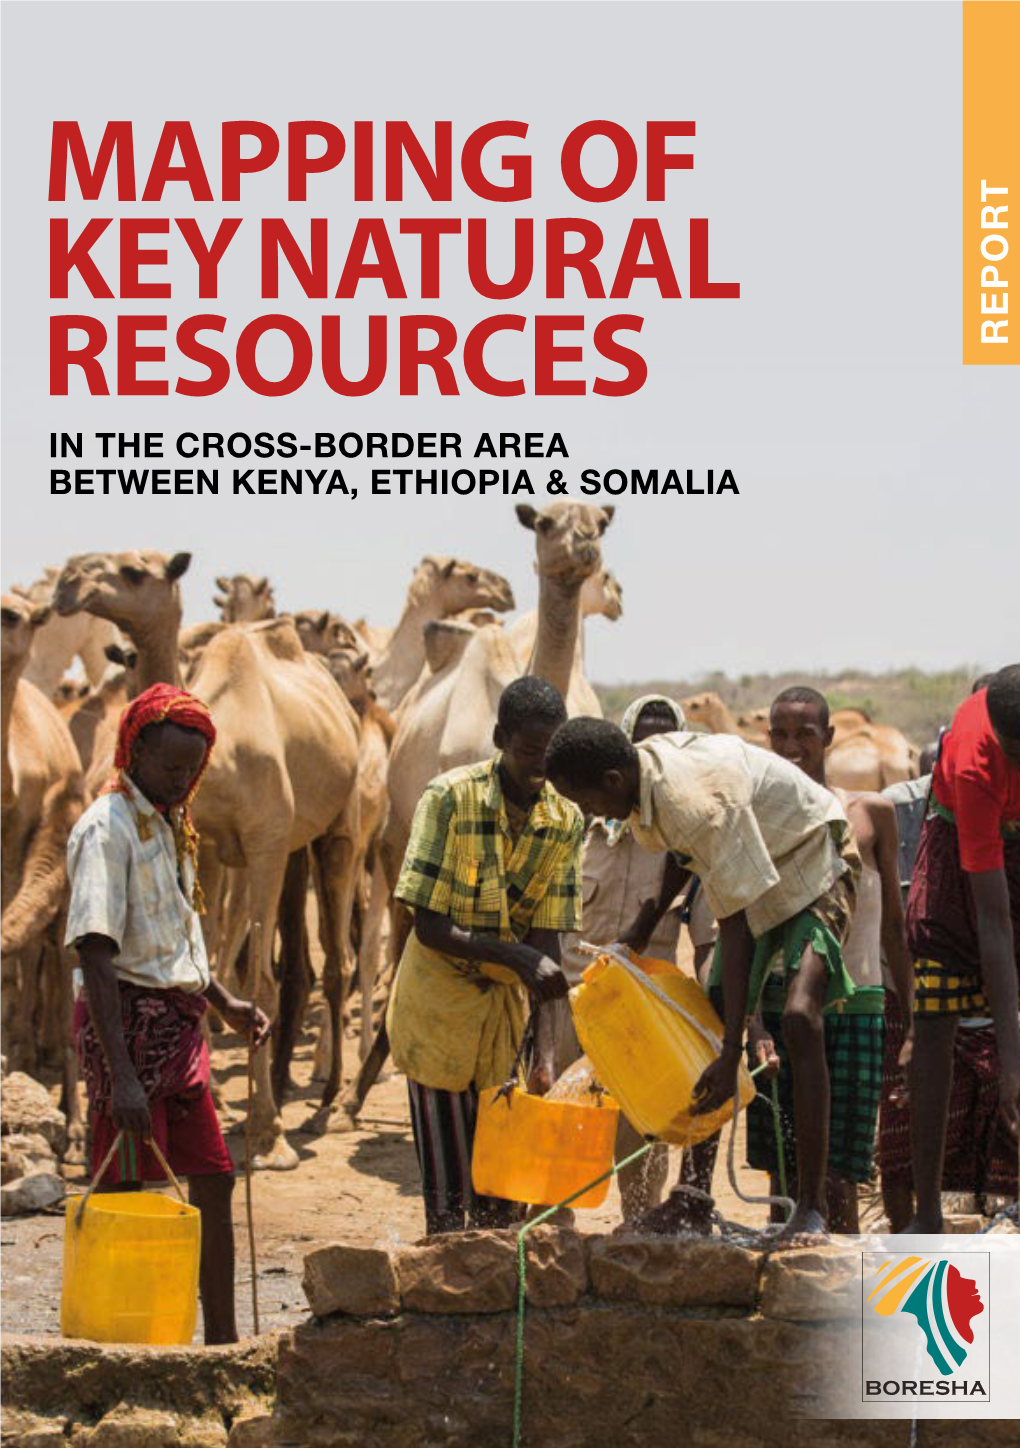 Mapping of Key Natural Resources in the Cross-Border Areas of Kenya, Somalia & Ethiopia